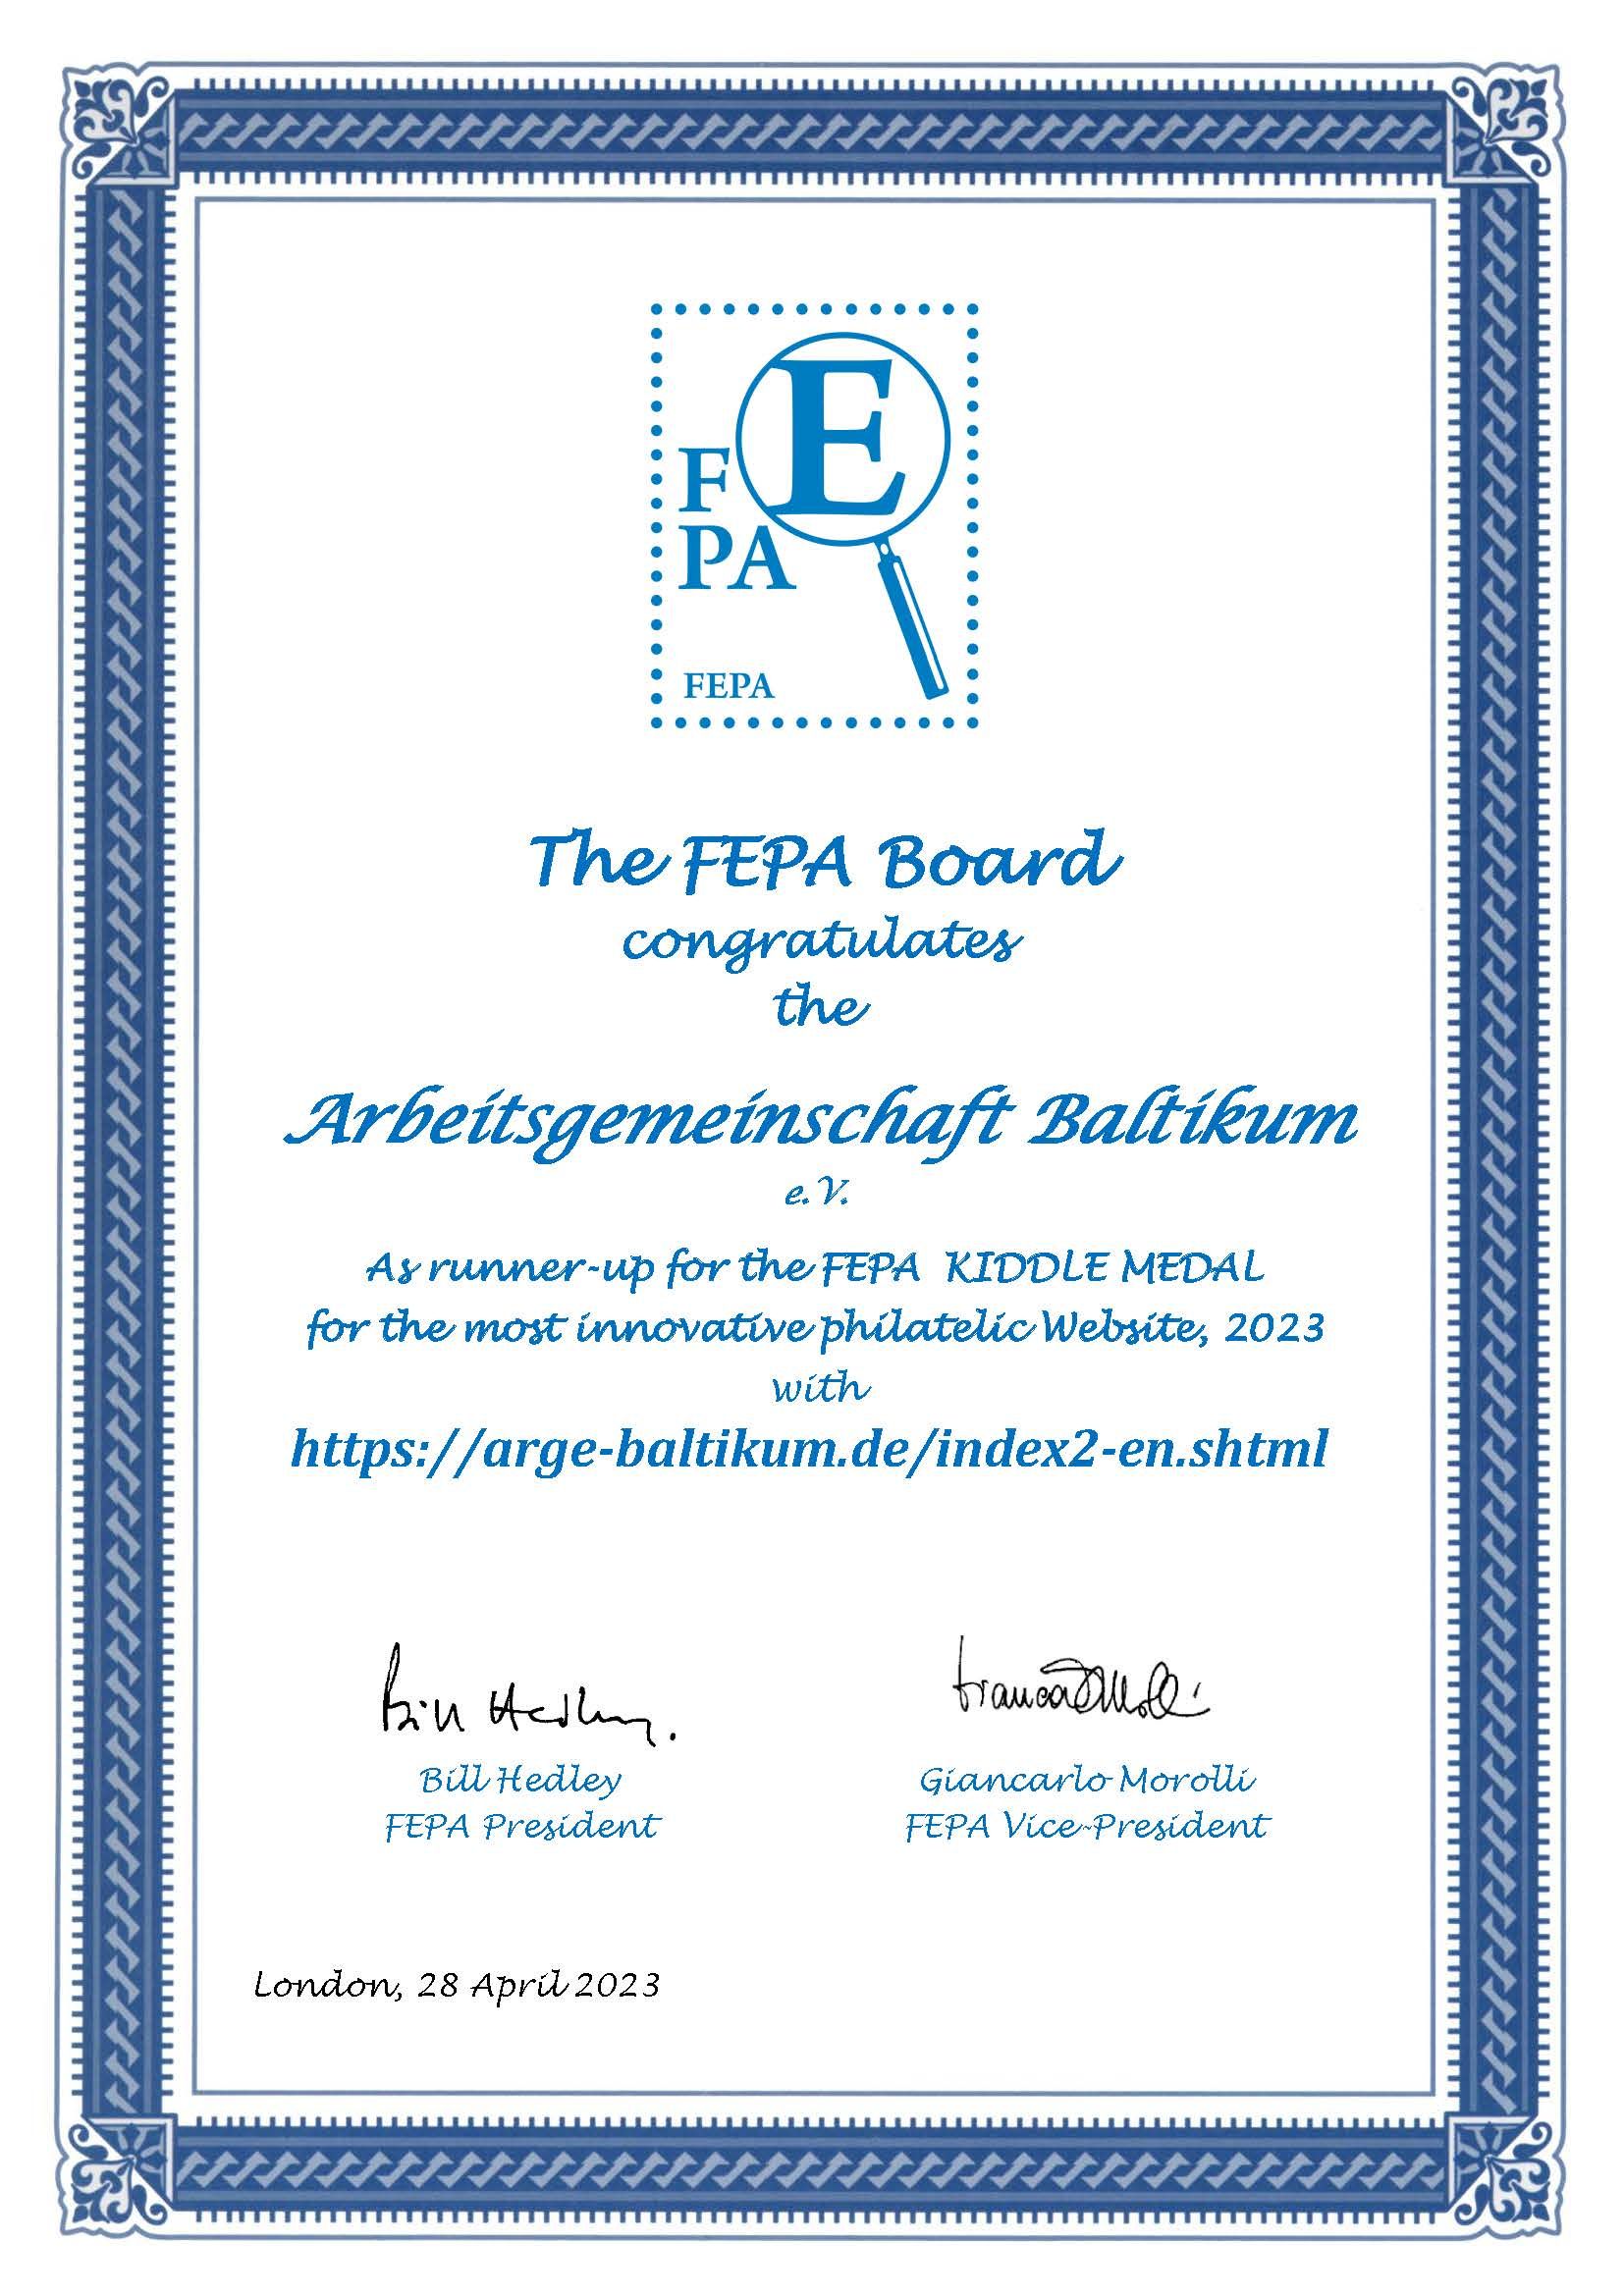 The ArGe Baltikum web is one of the 5 most innovative philatelic webs in Europe in 2023, it is a finalist for the FEPA Francis Kiddle Medal.